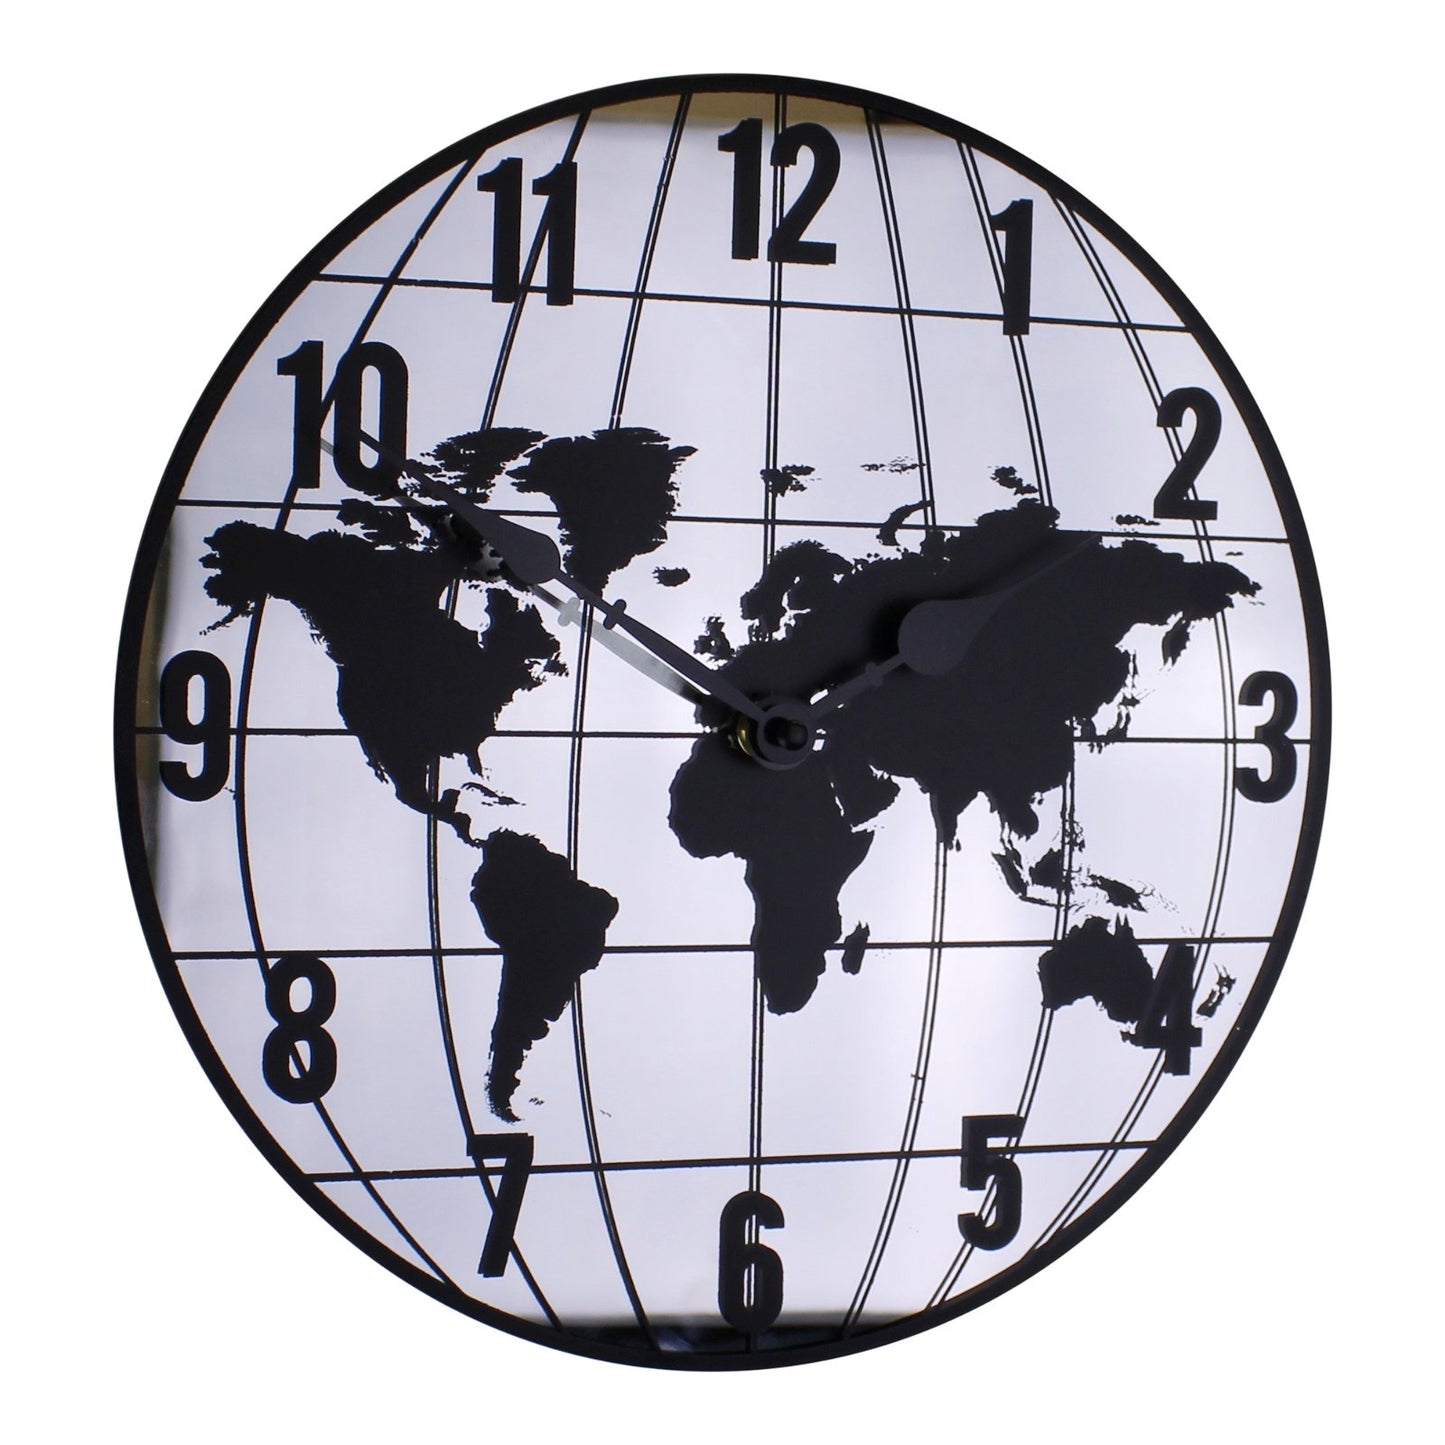 Mirrored Clock Featuring Map Of The World Design 30cm